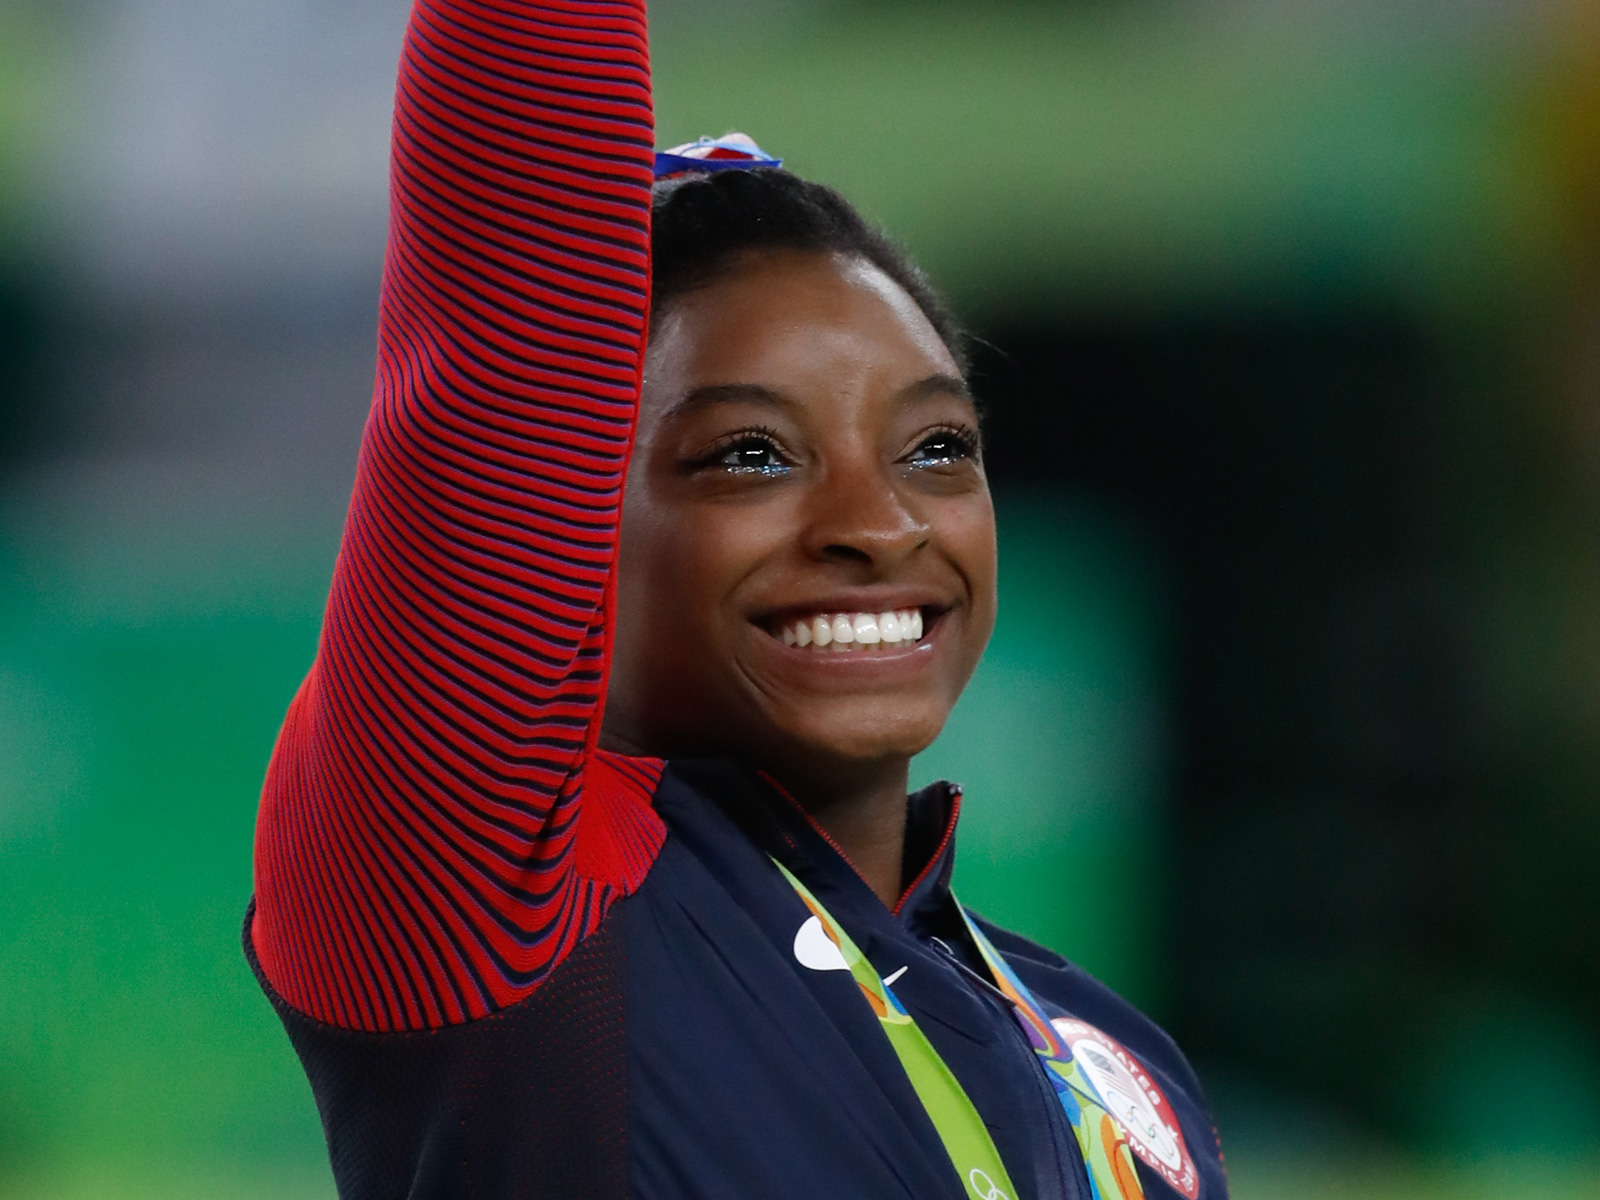 Simone Biles faced backlash, but mental health experts and teammates alike  offered support - Ragan Communications